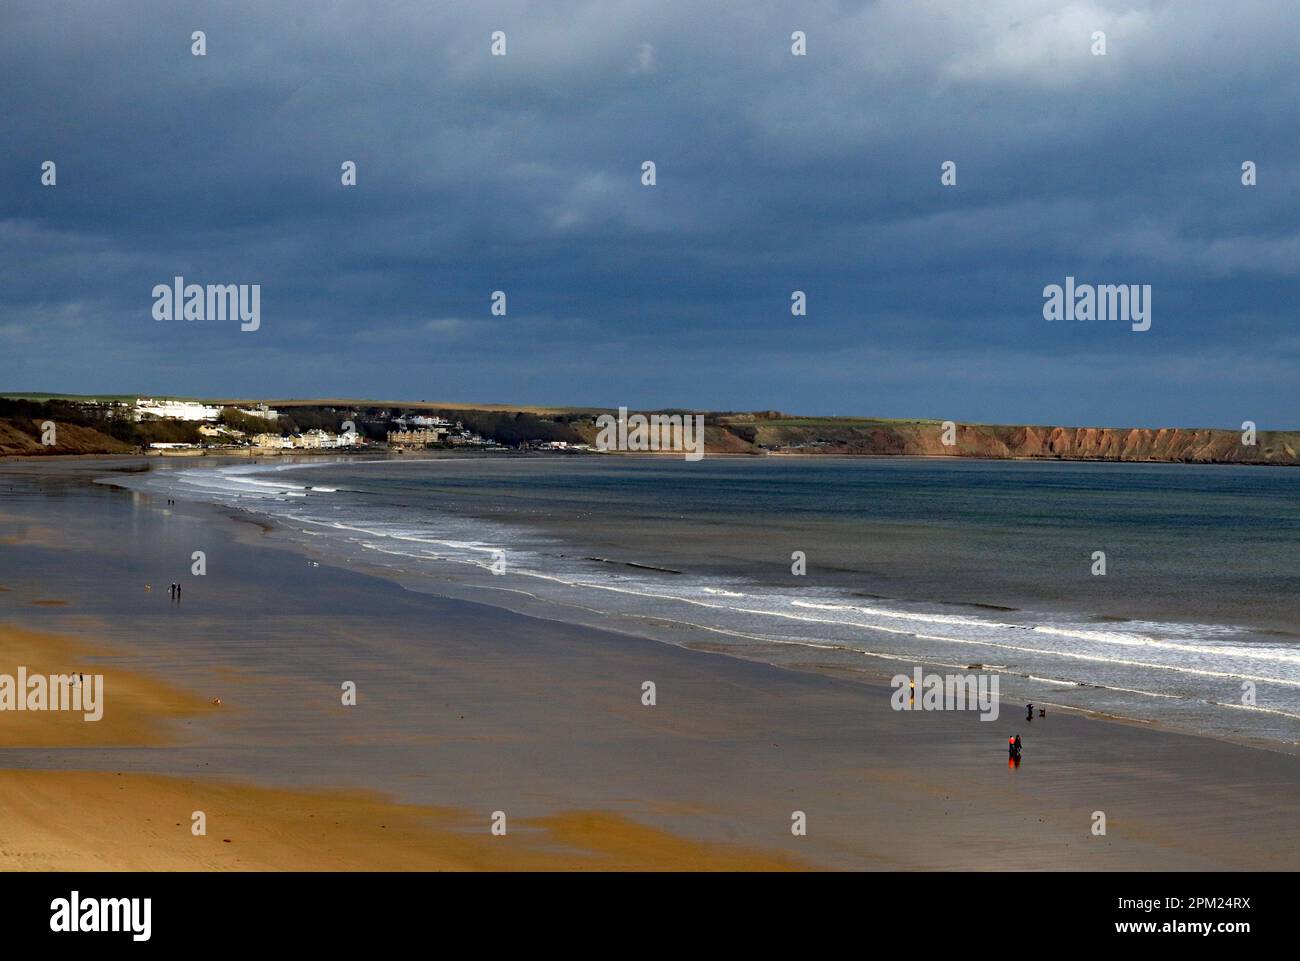 Hunmanby Sands, a vast area of sands when the tide is out on the east coast of England between Bridlington in the south and Filey to the north. Stock Photo